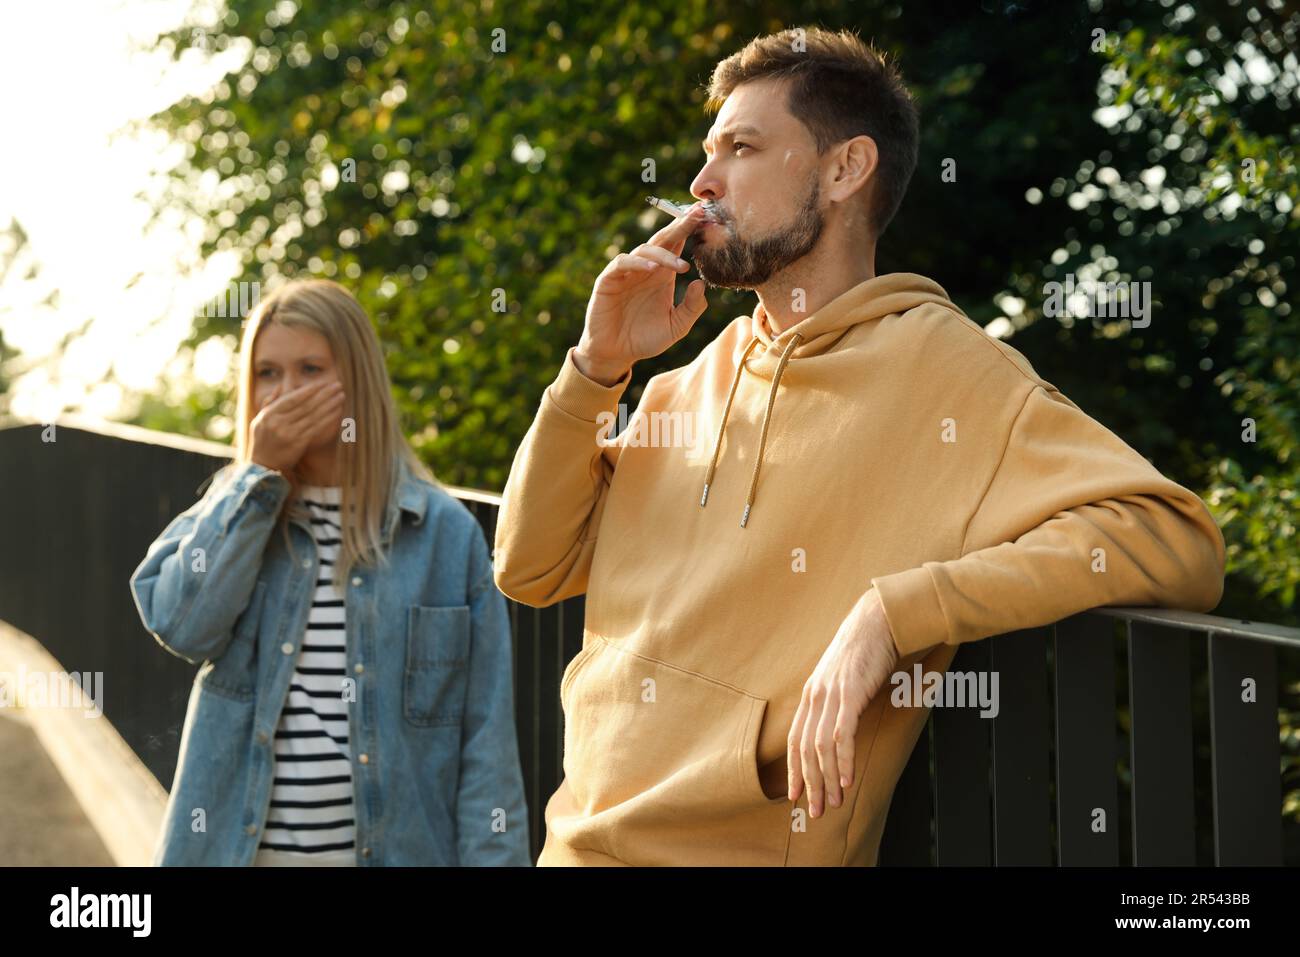 Handsome man smoking cigarette at public place outdoors Stock Photo